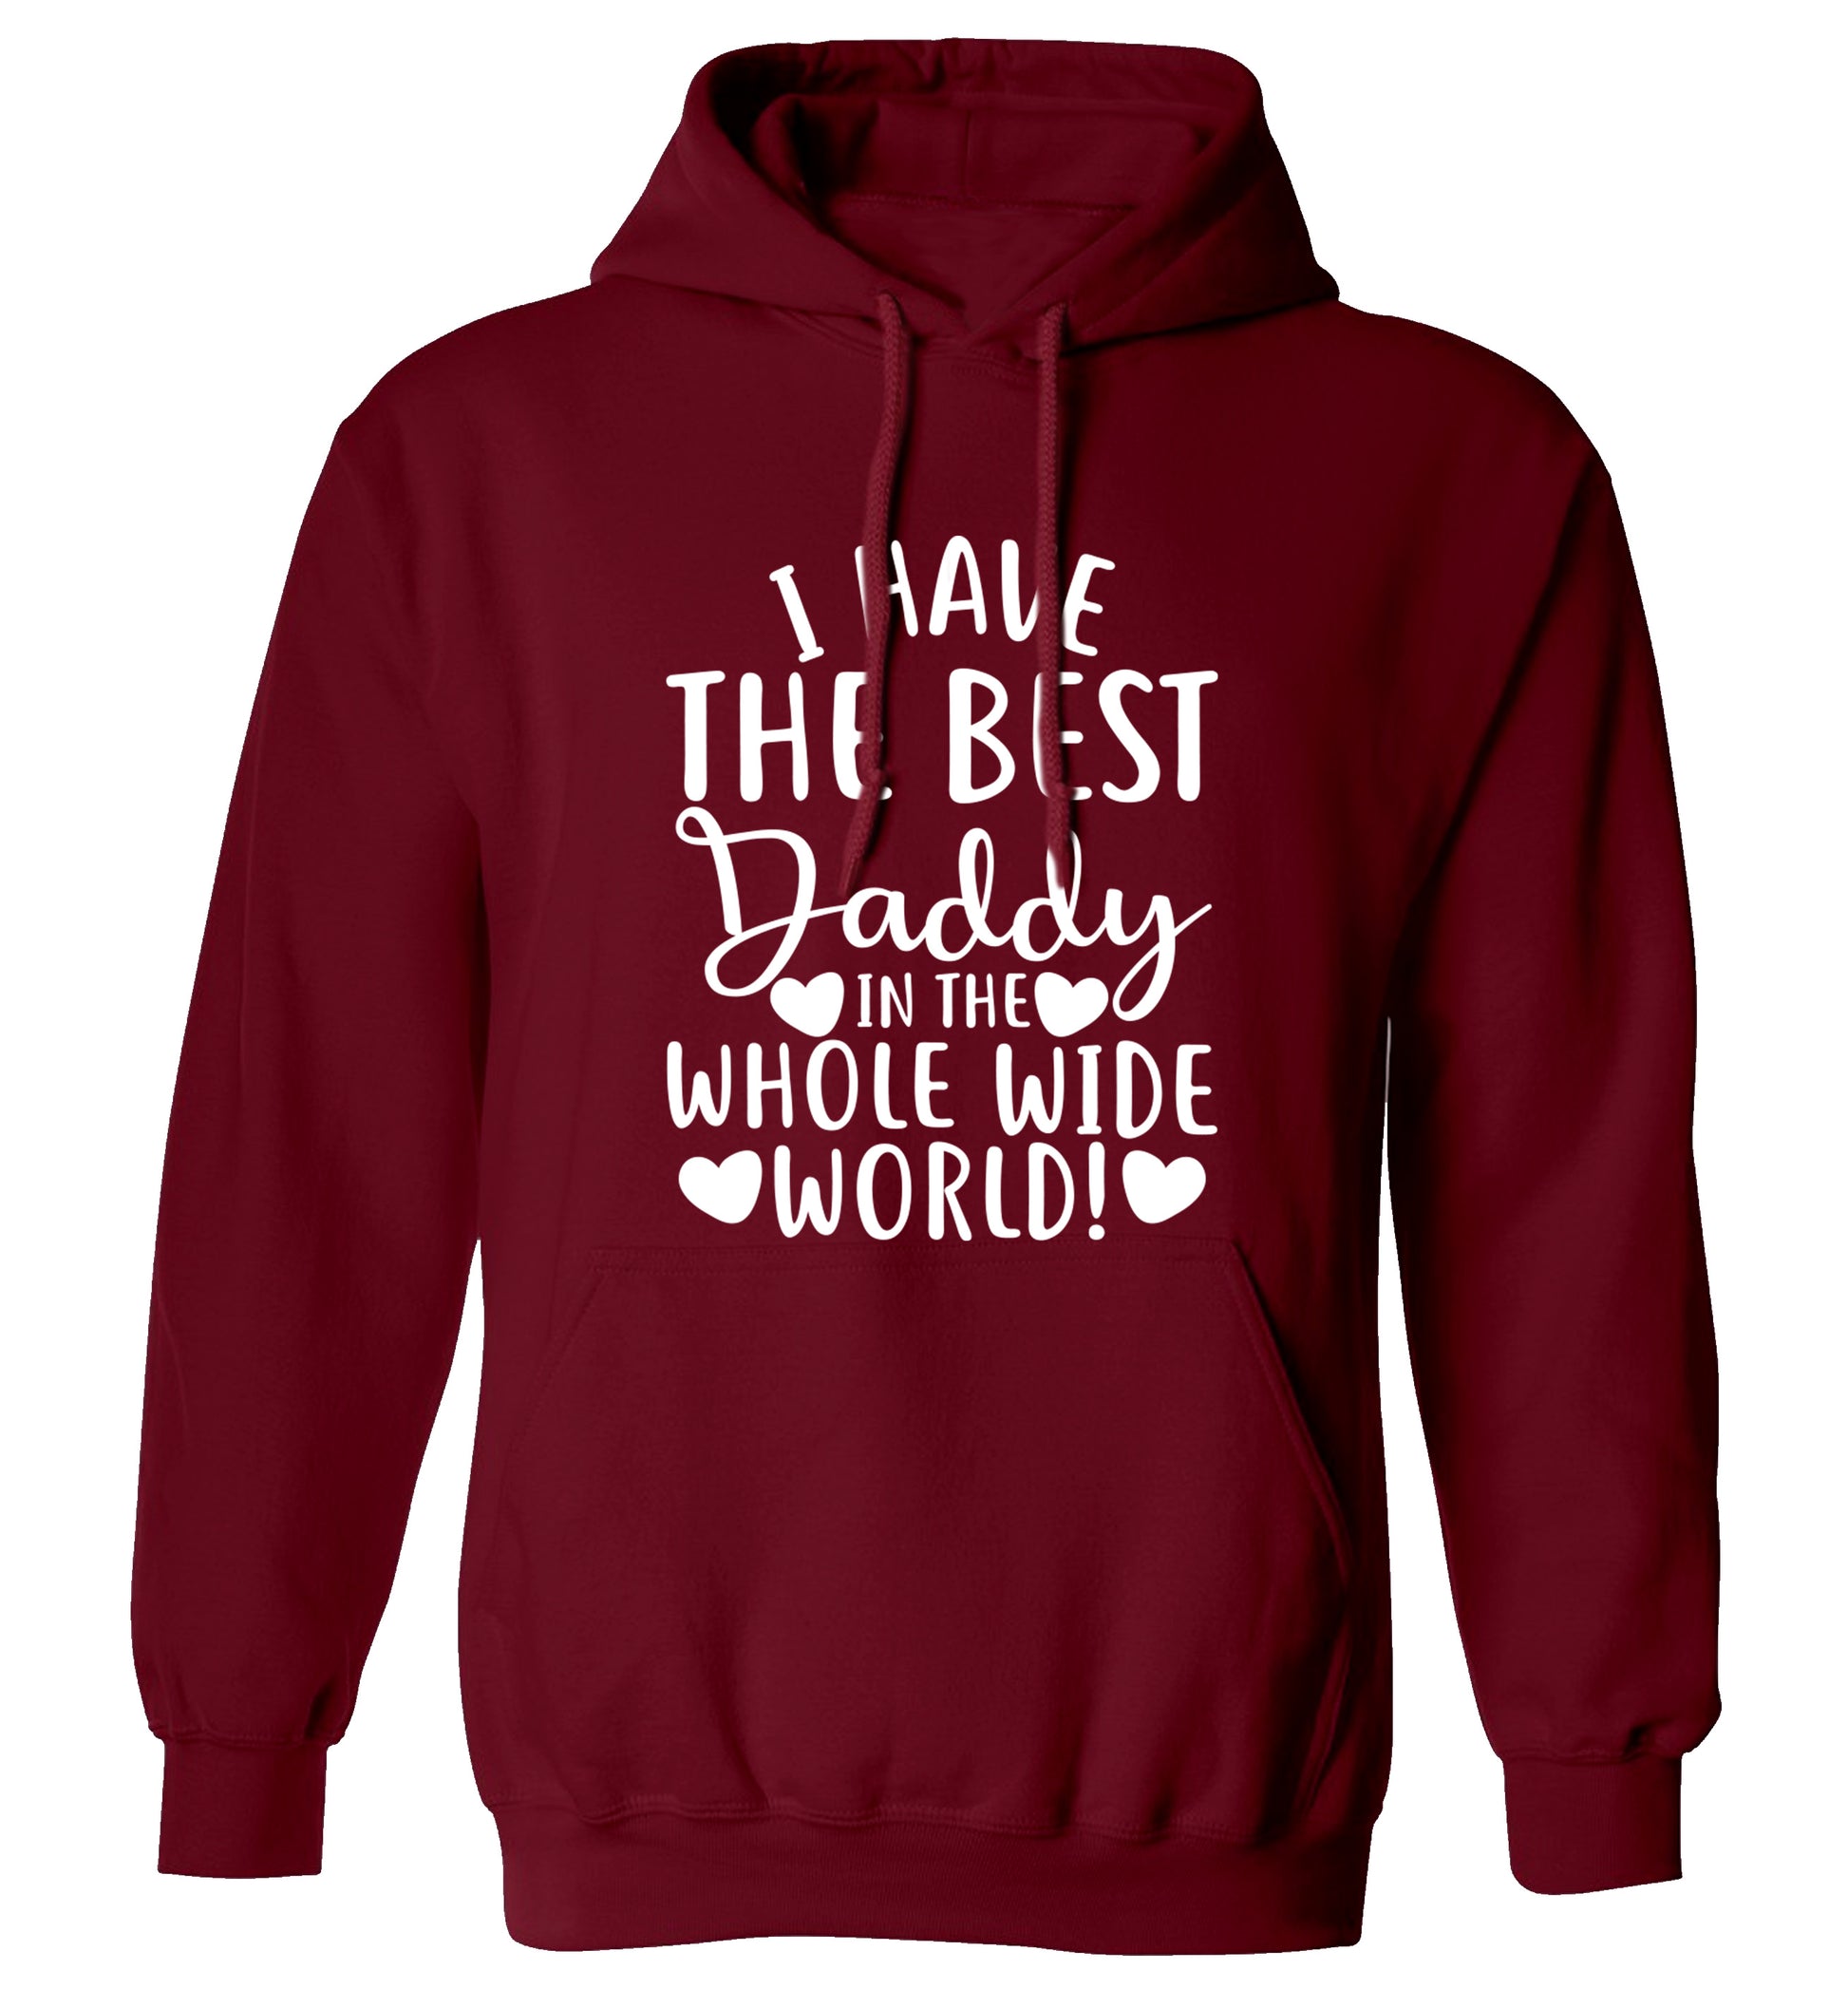 I have the best daddy in the whole wide world adults unisex maroon hoodie 2XL